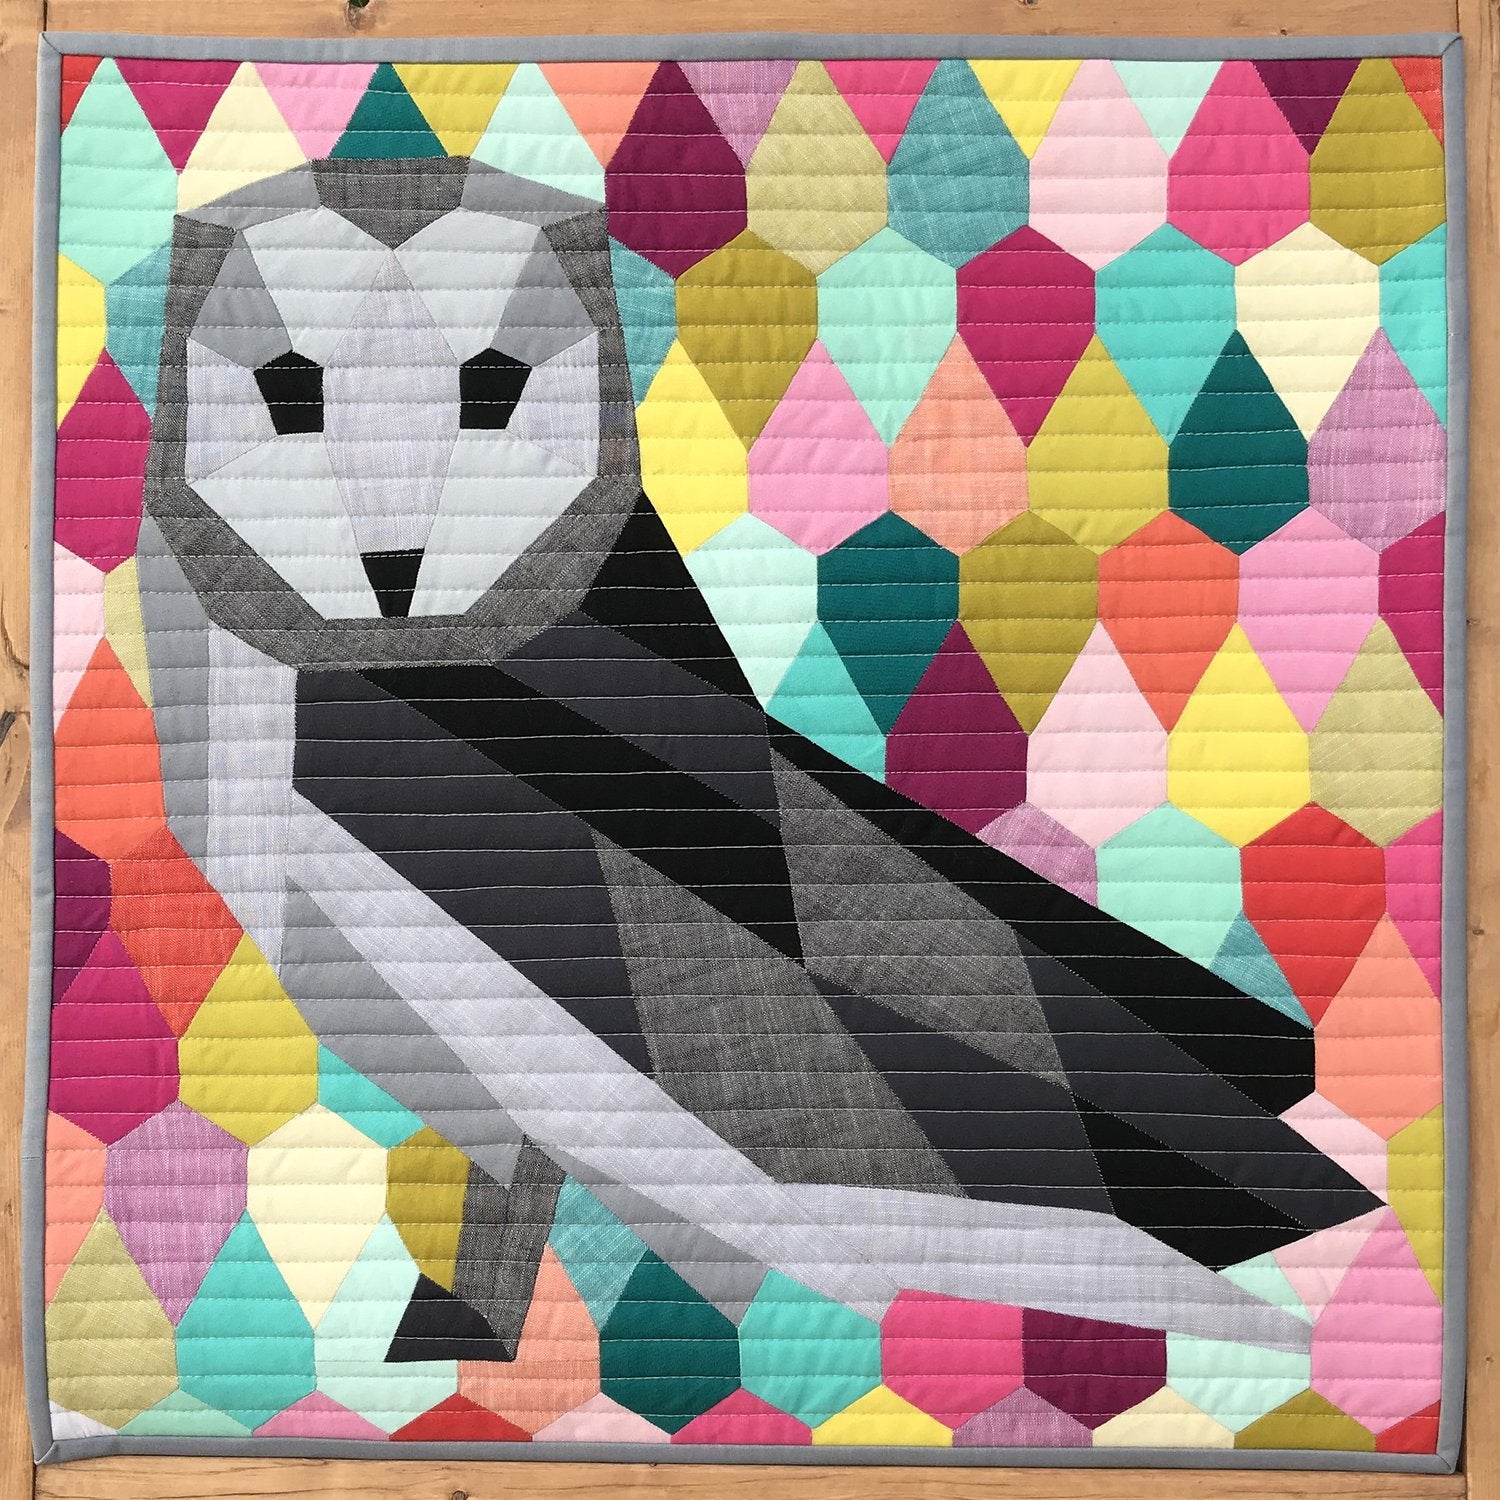 The Barn Owl by Violet Craft | VC022